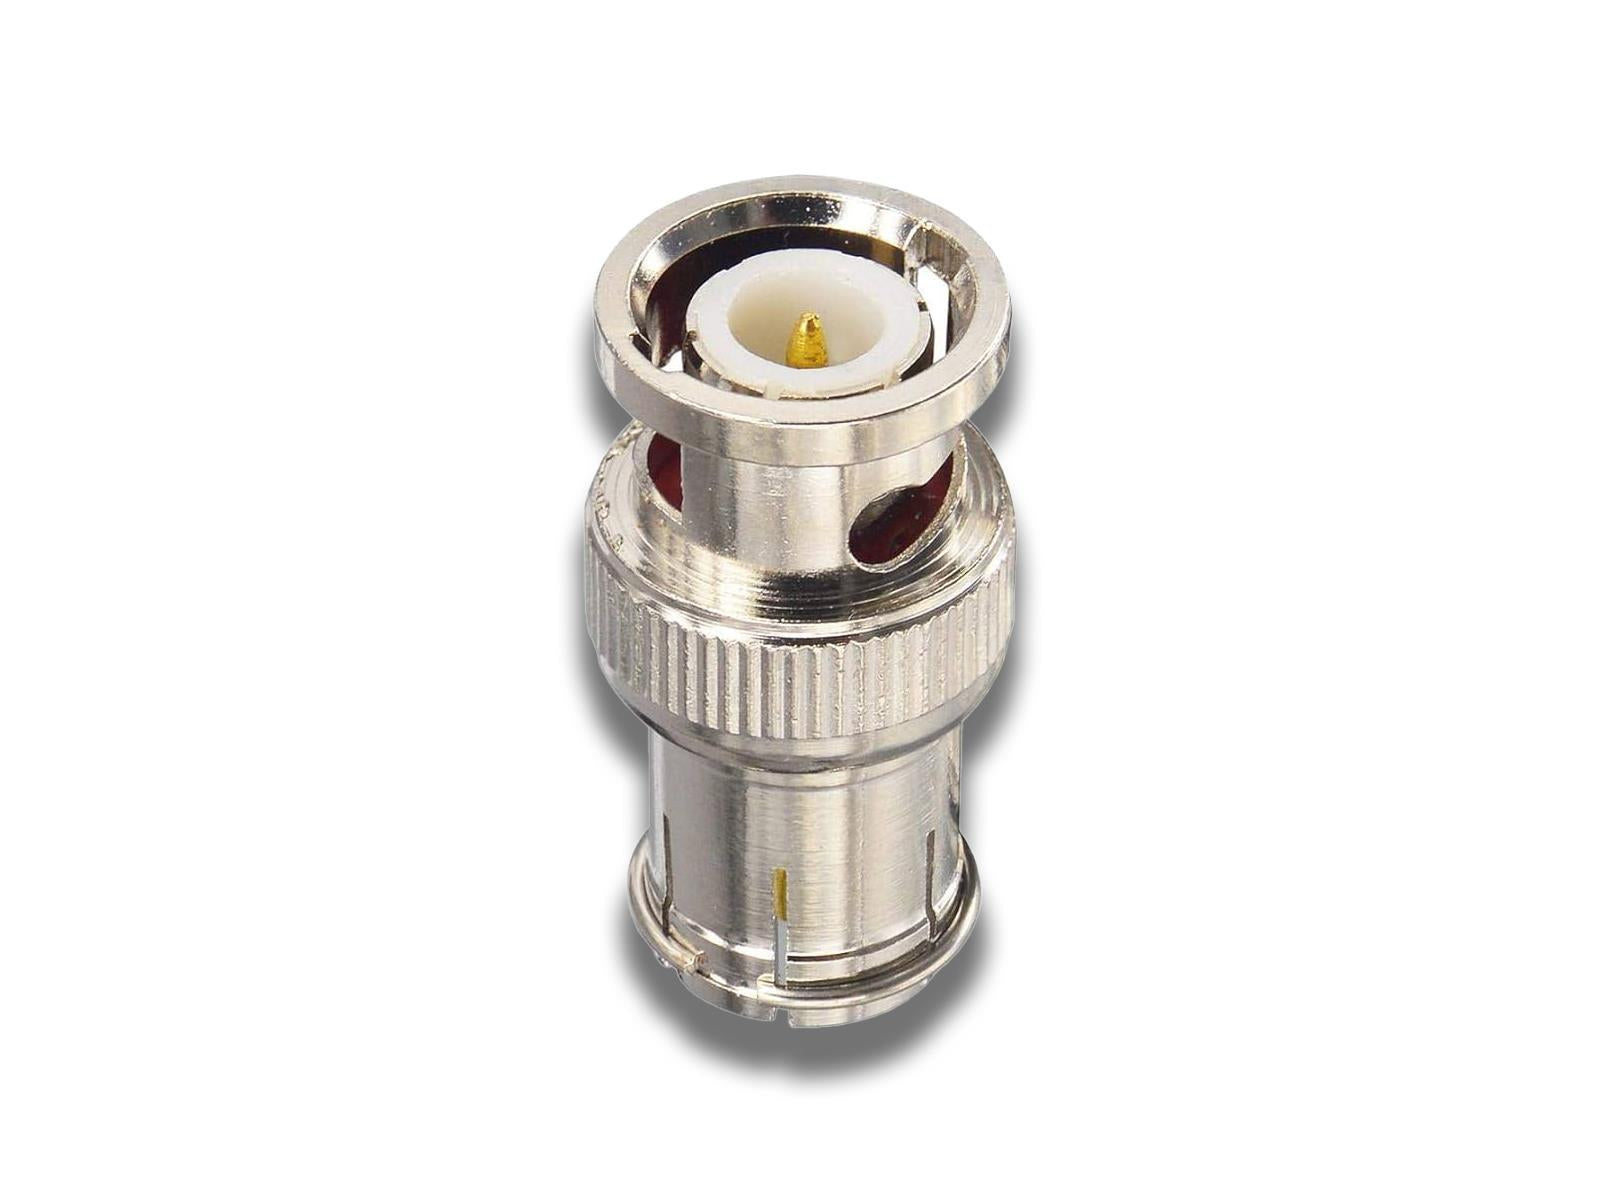 Female Coaxial to Male BNC Adapter